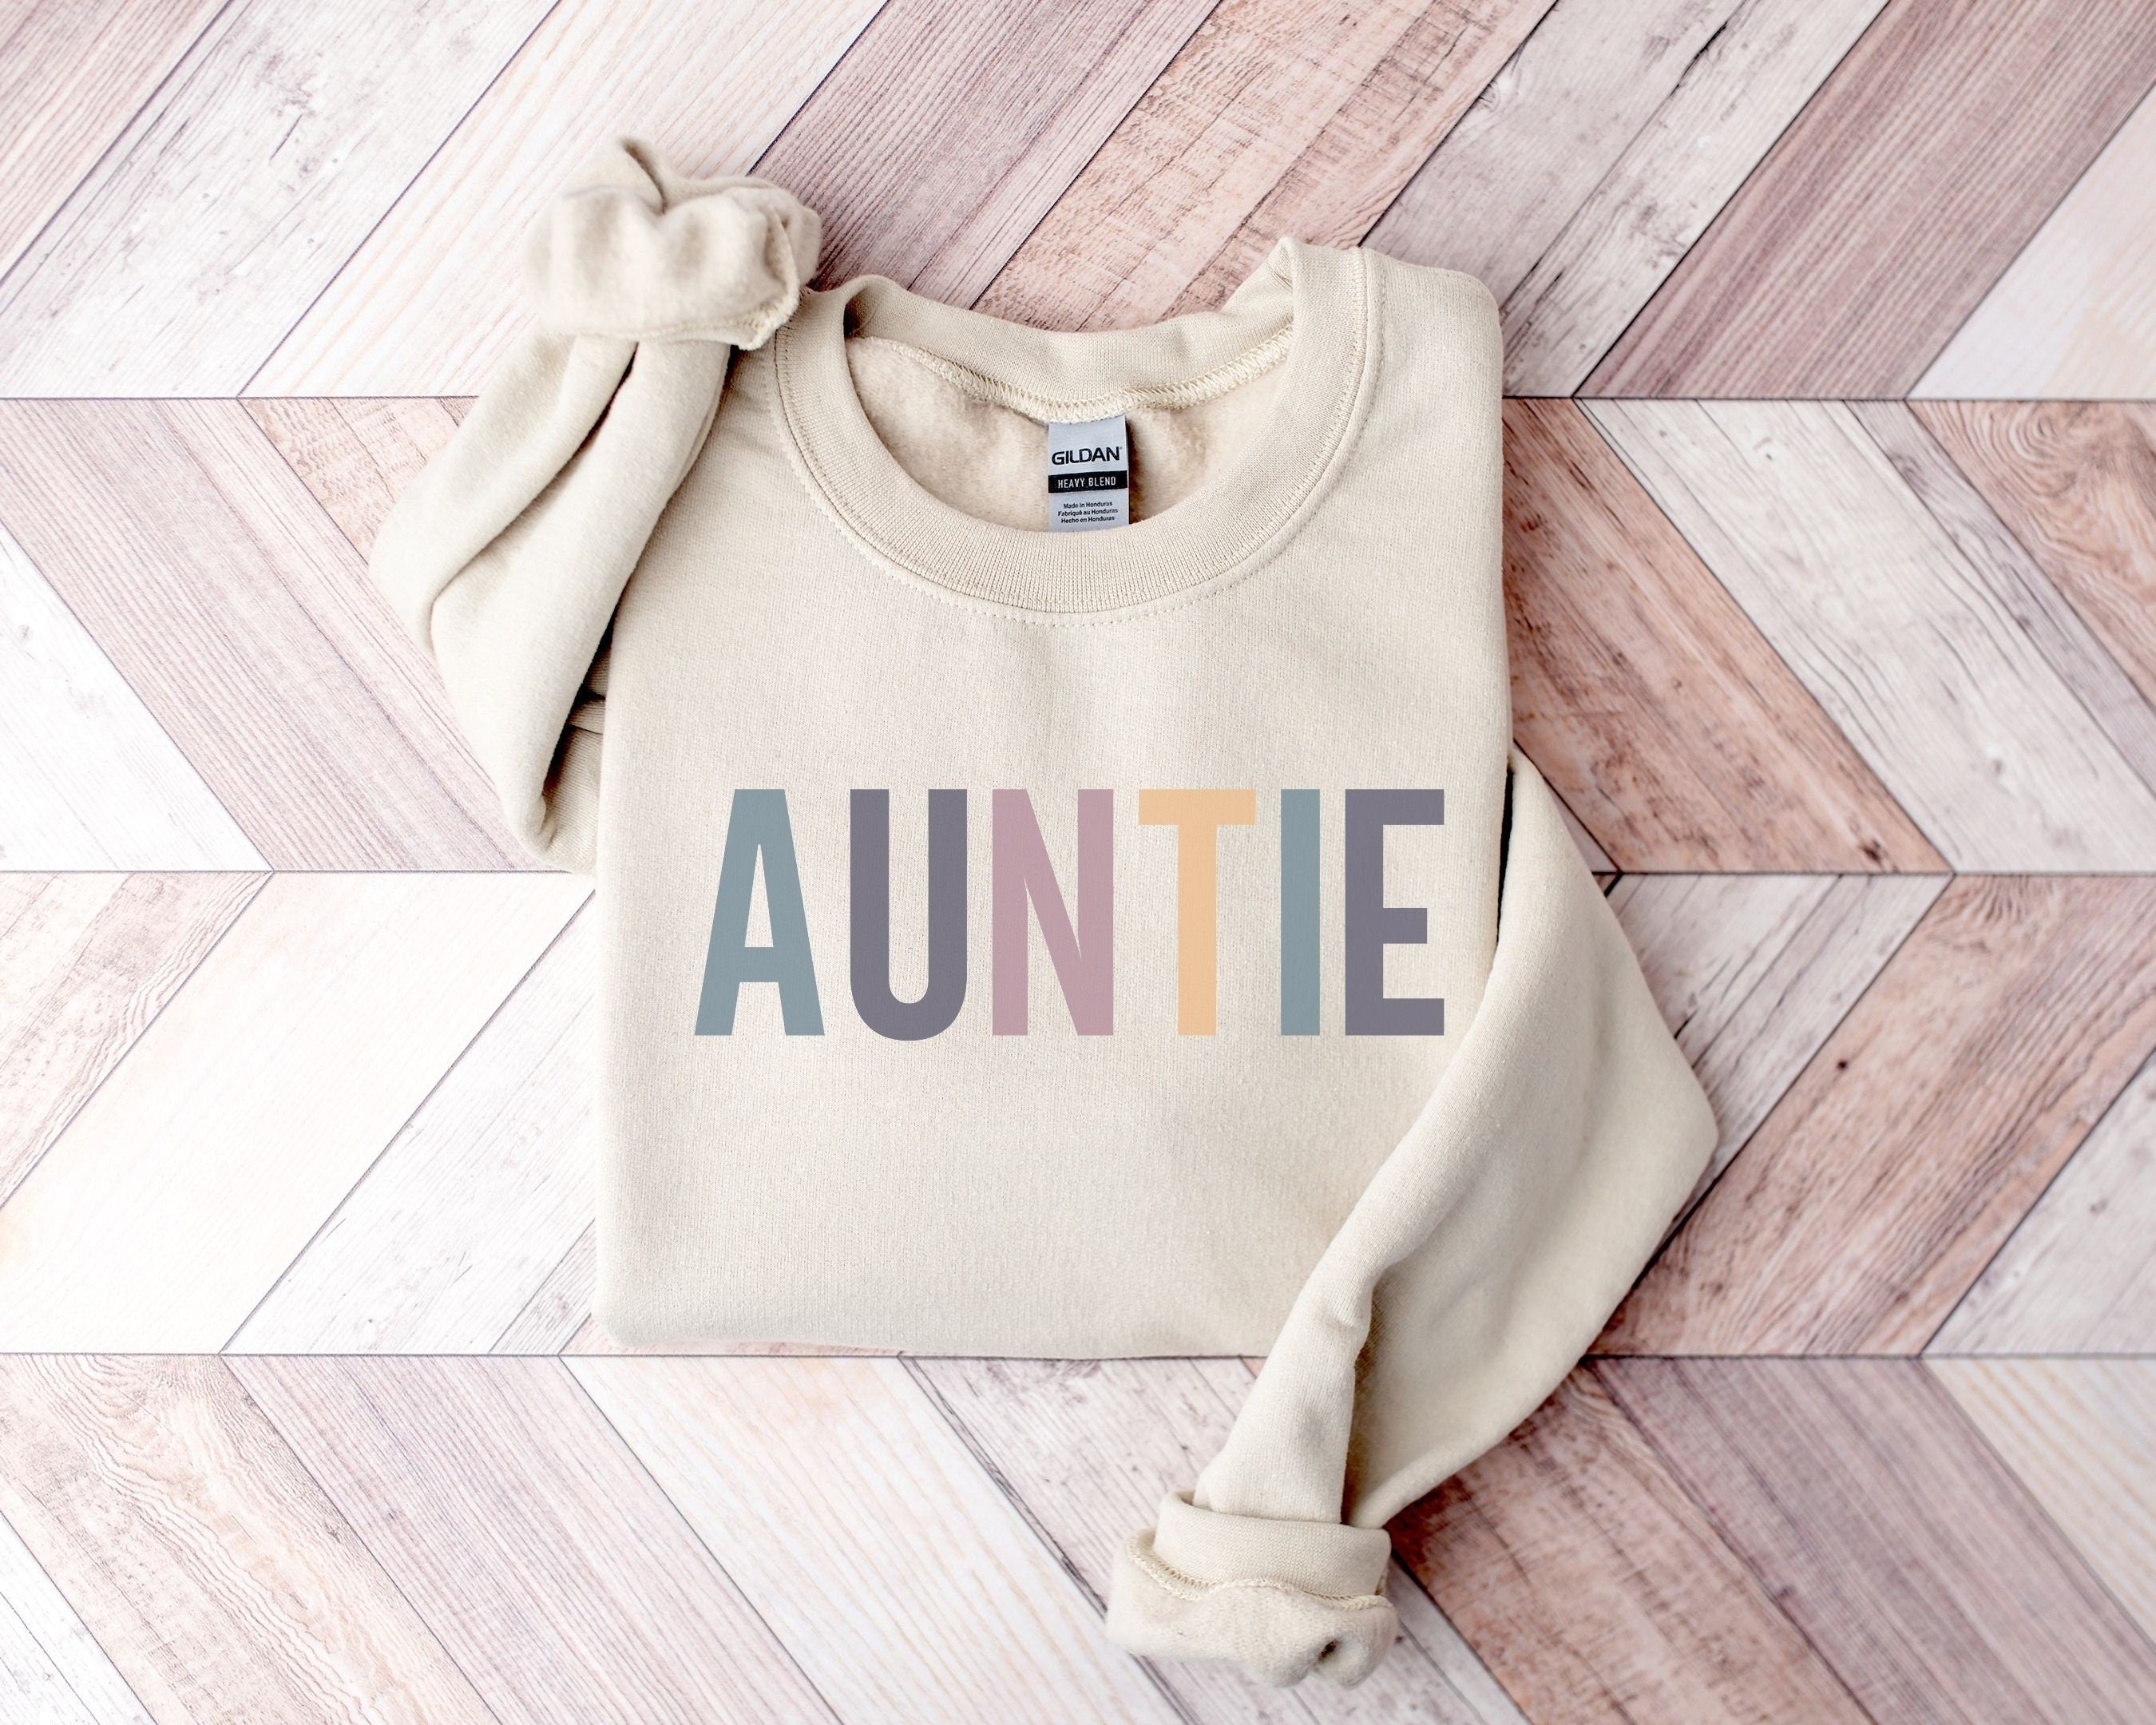 Funny Aunt Shirt - Stay Cozy and Stylish with this Auntie Sweatshirt